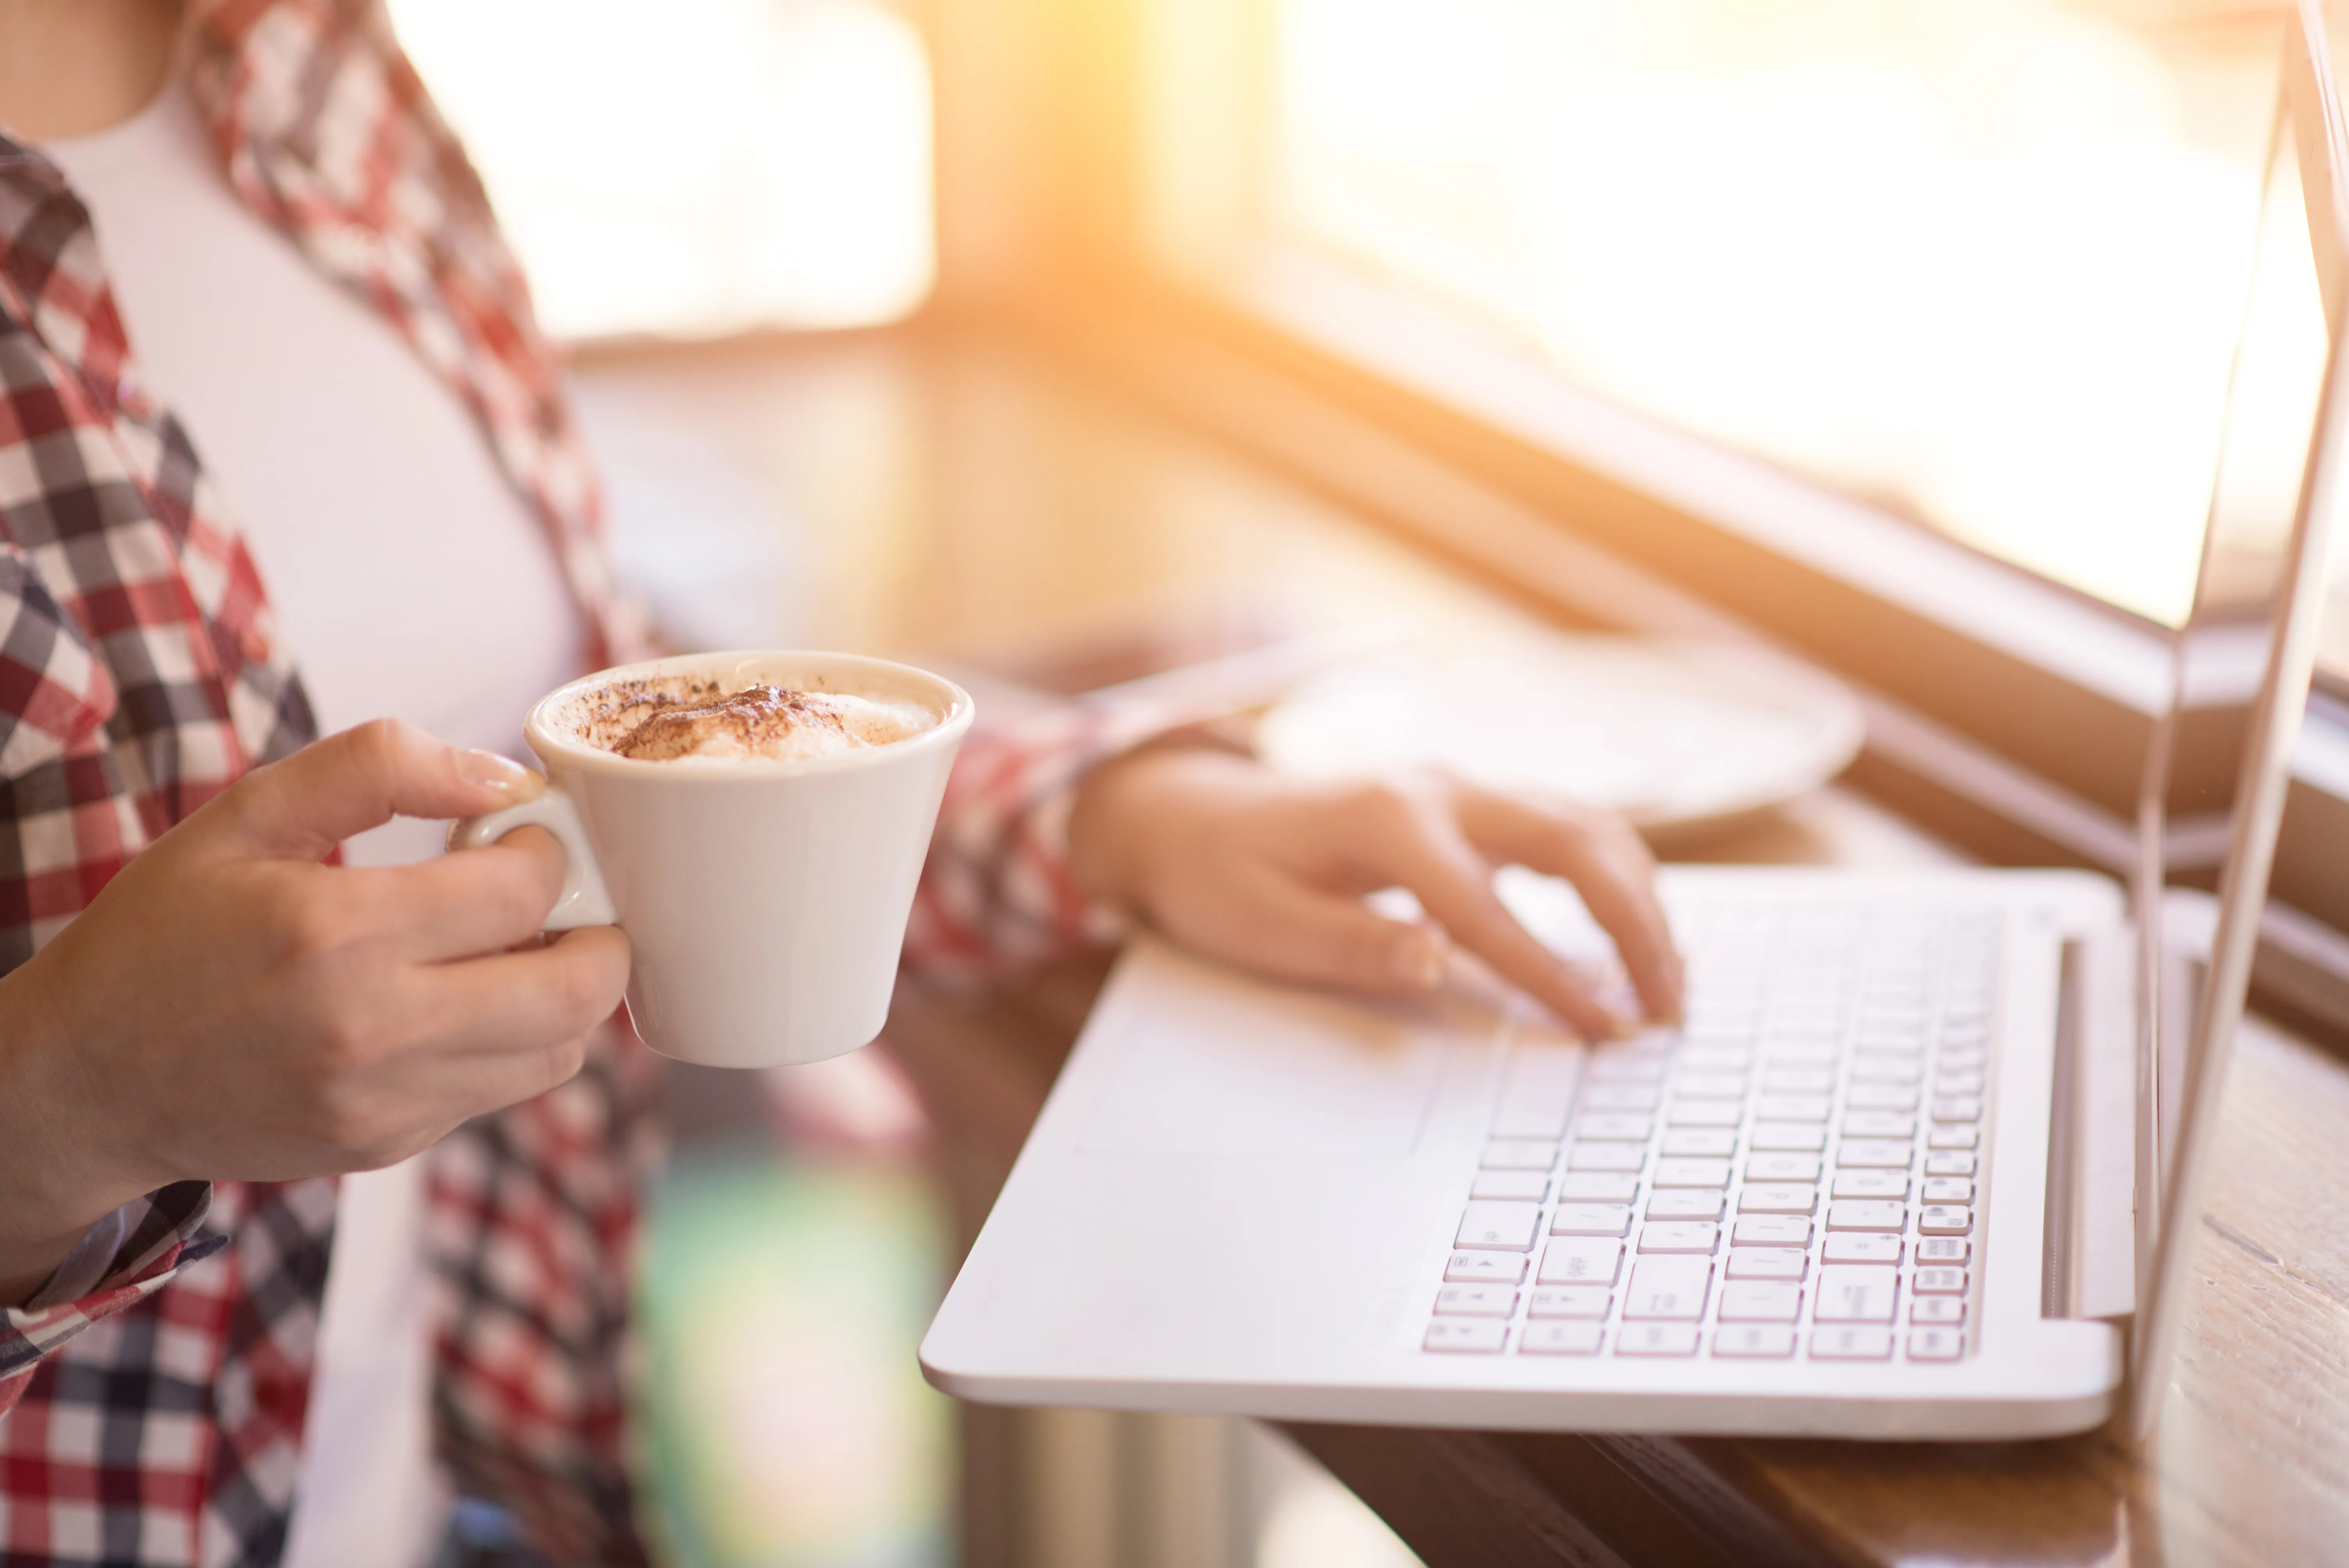 5 Ways to Have a More Productive Morning, According to Science